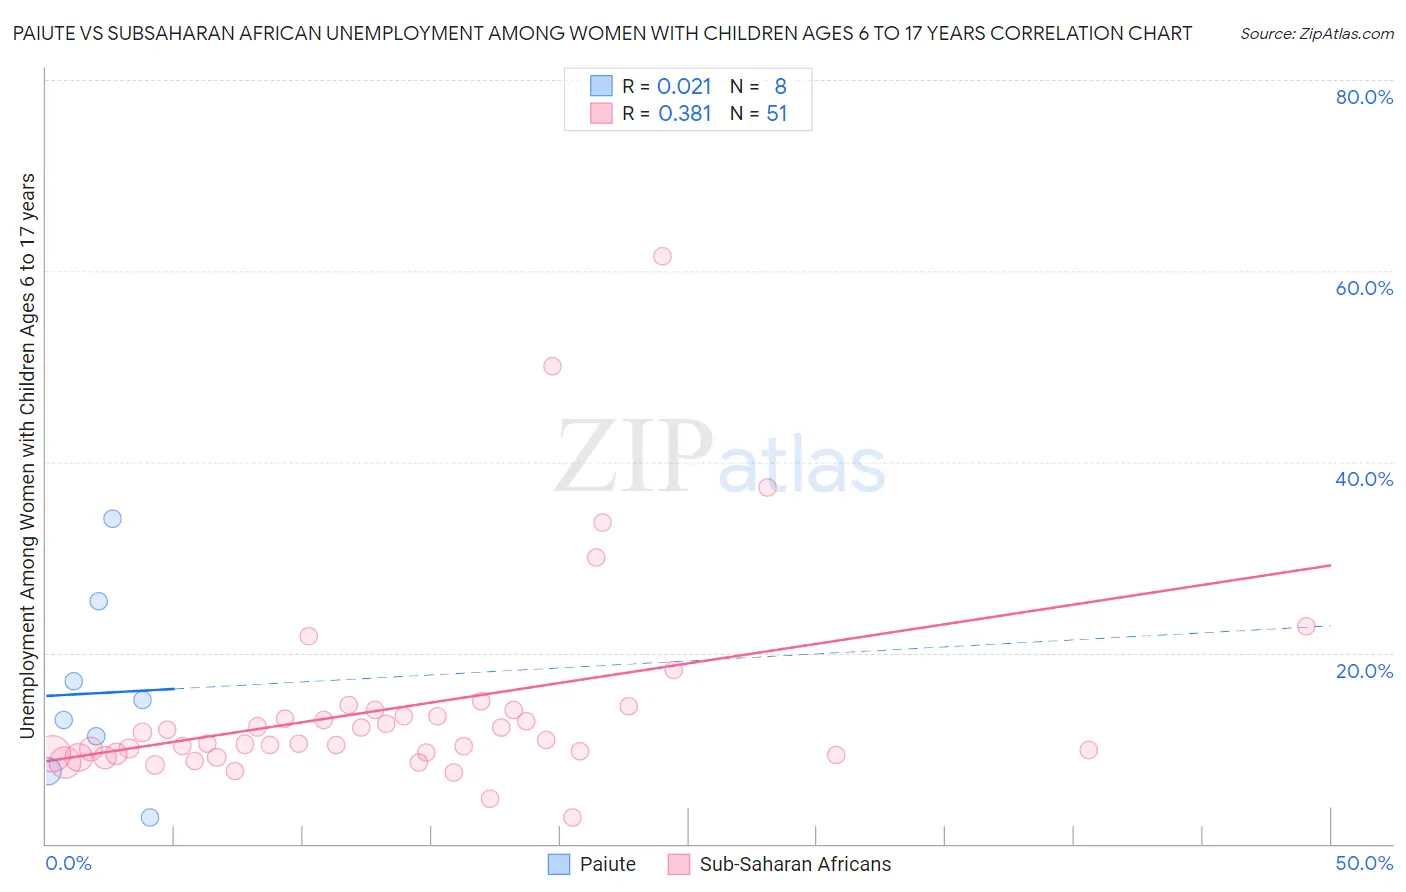 Paiute vs Subsaharan African Unemployment Among Women with Children Ages 6 to 17 years